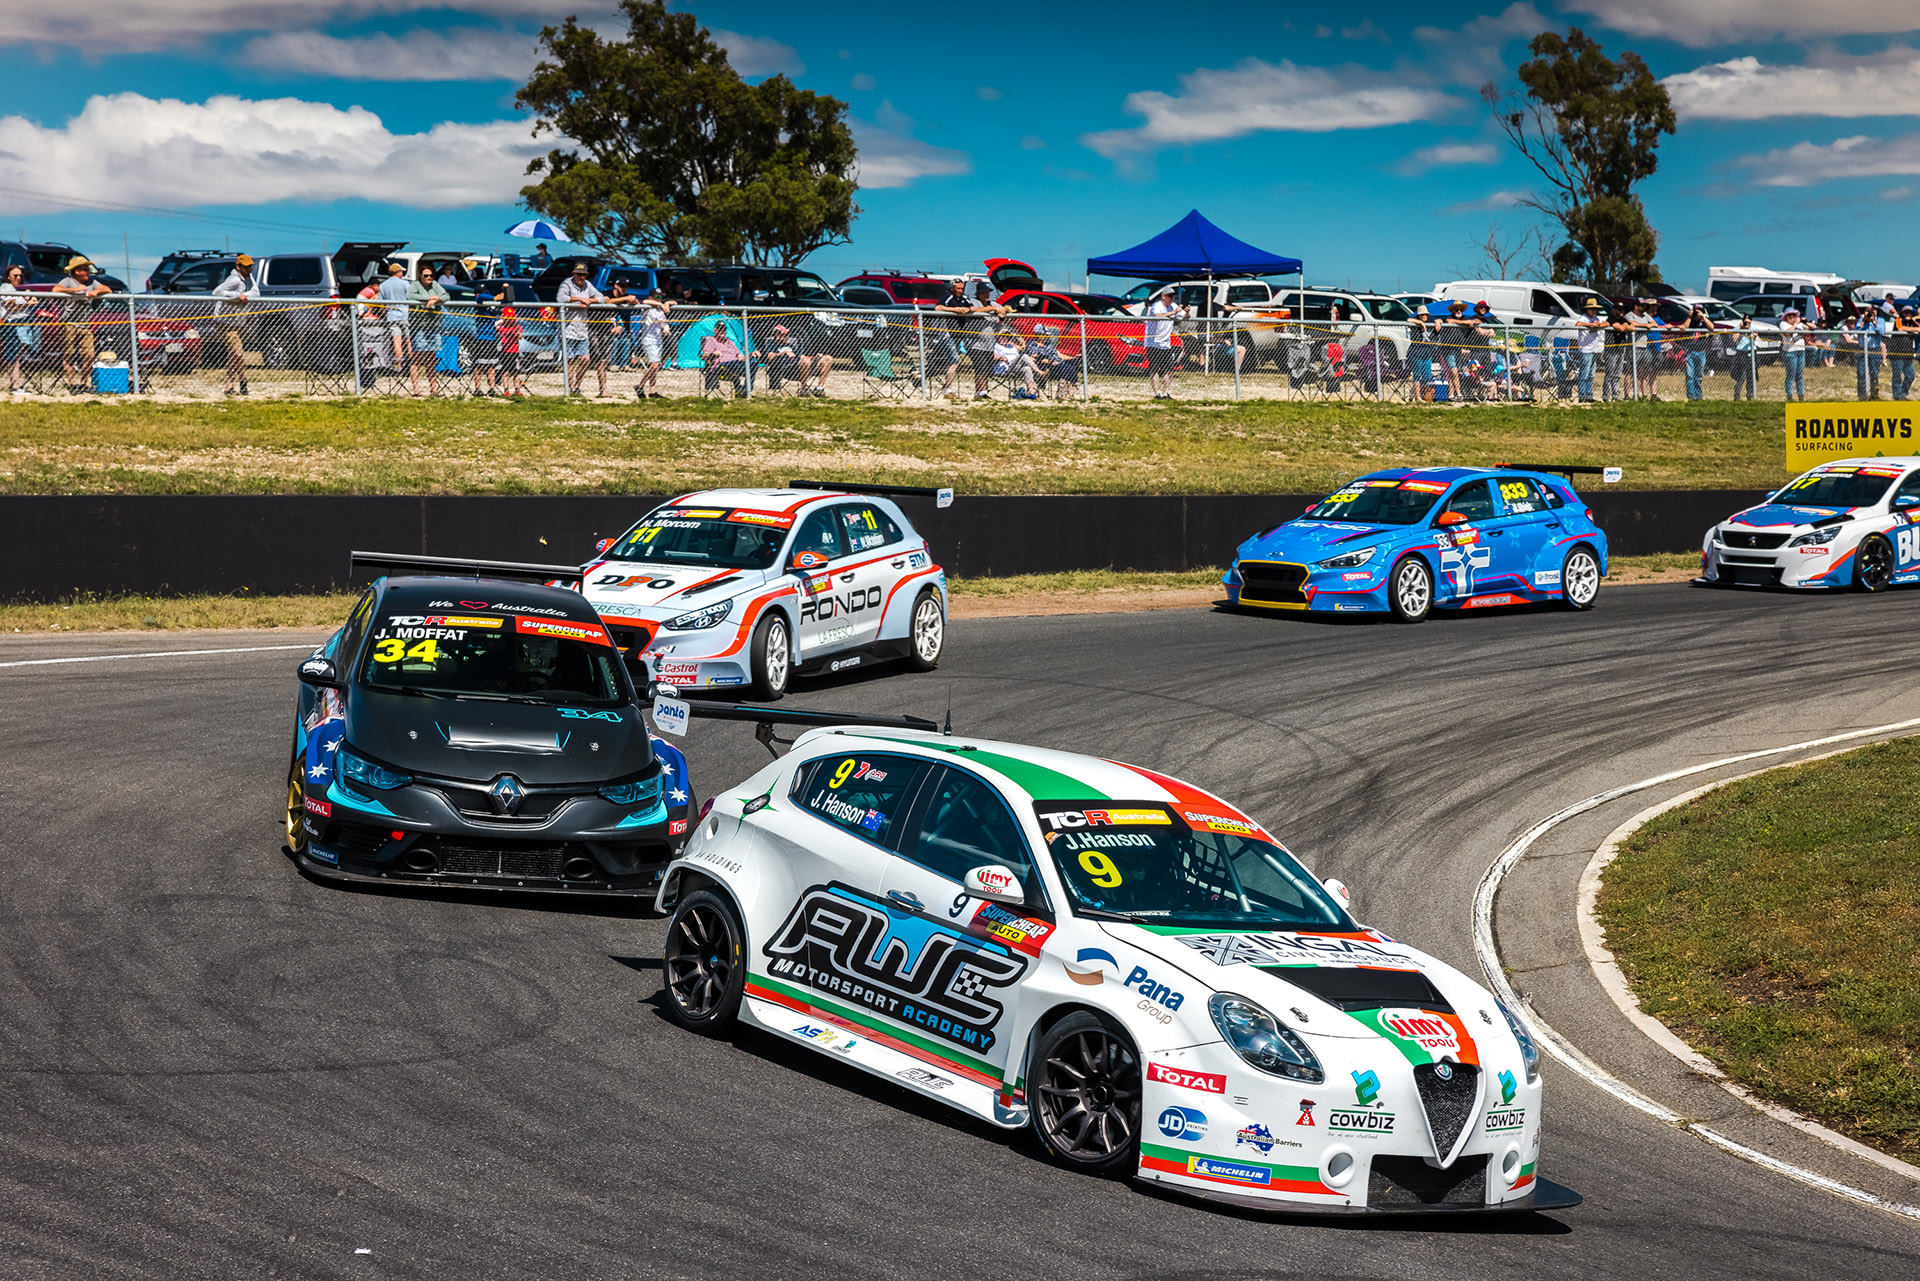 Respected Tasmanian business secures title rights to Race Tasmania